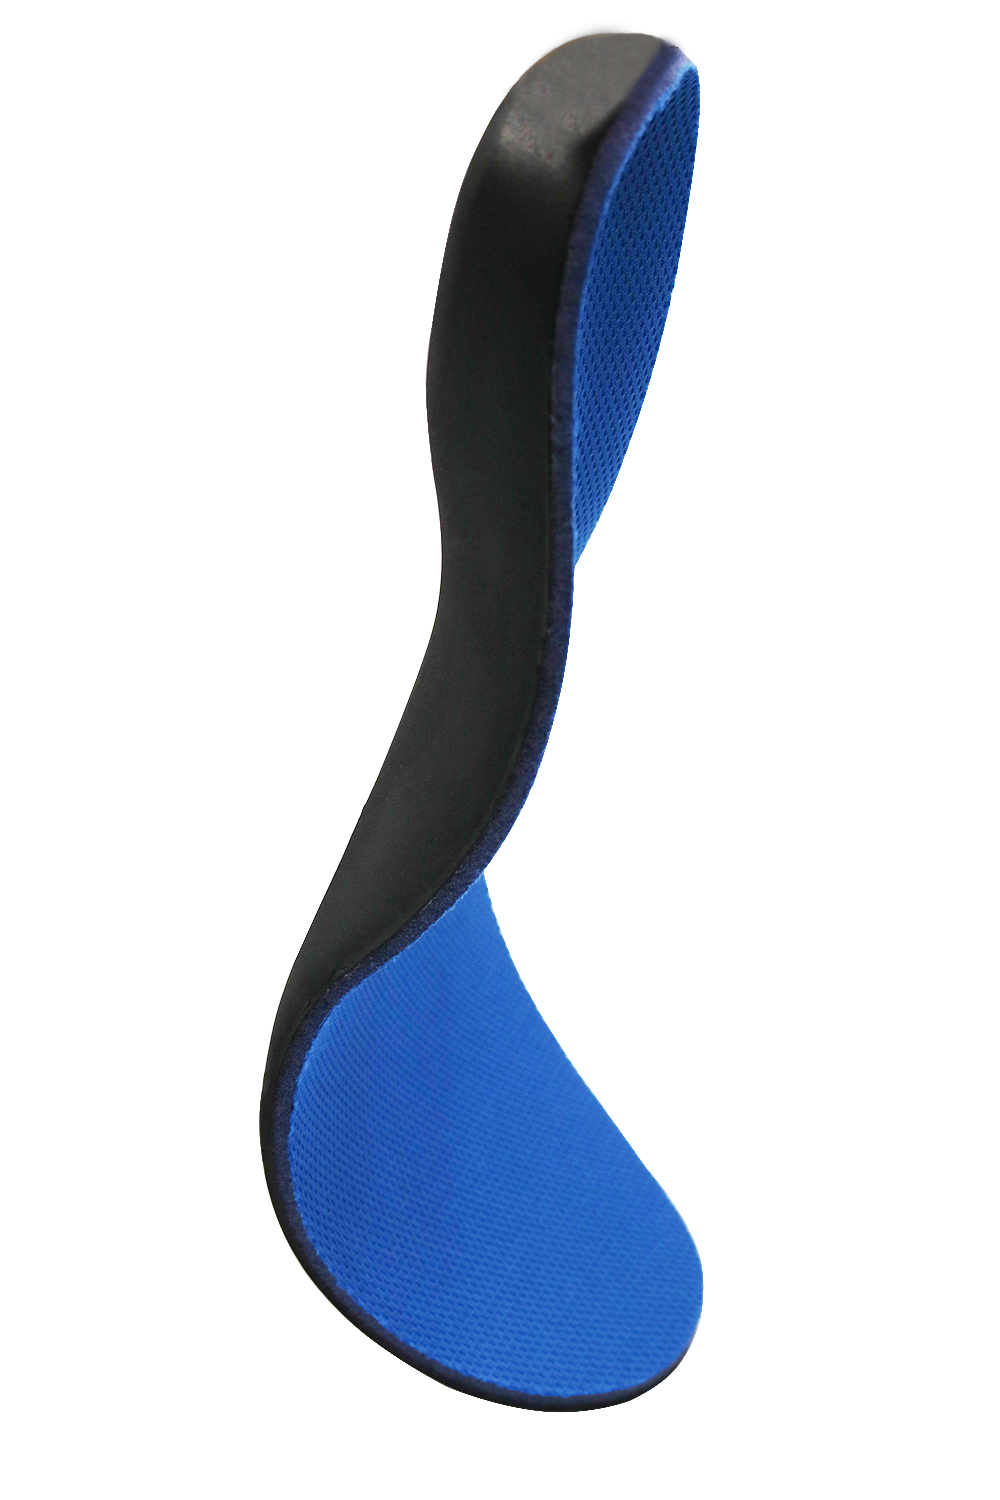 news-S-King massage orthotic inserts for flat feet for flat feet for sports-S-King-img-1